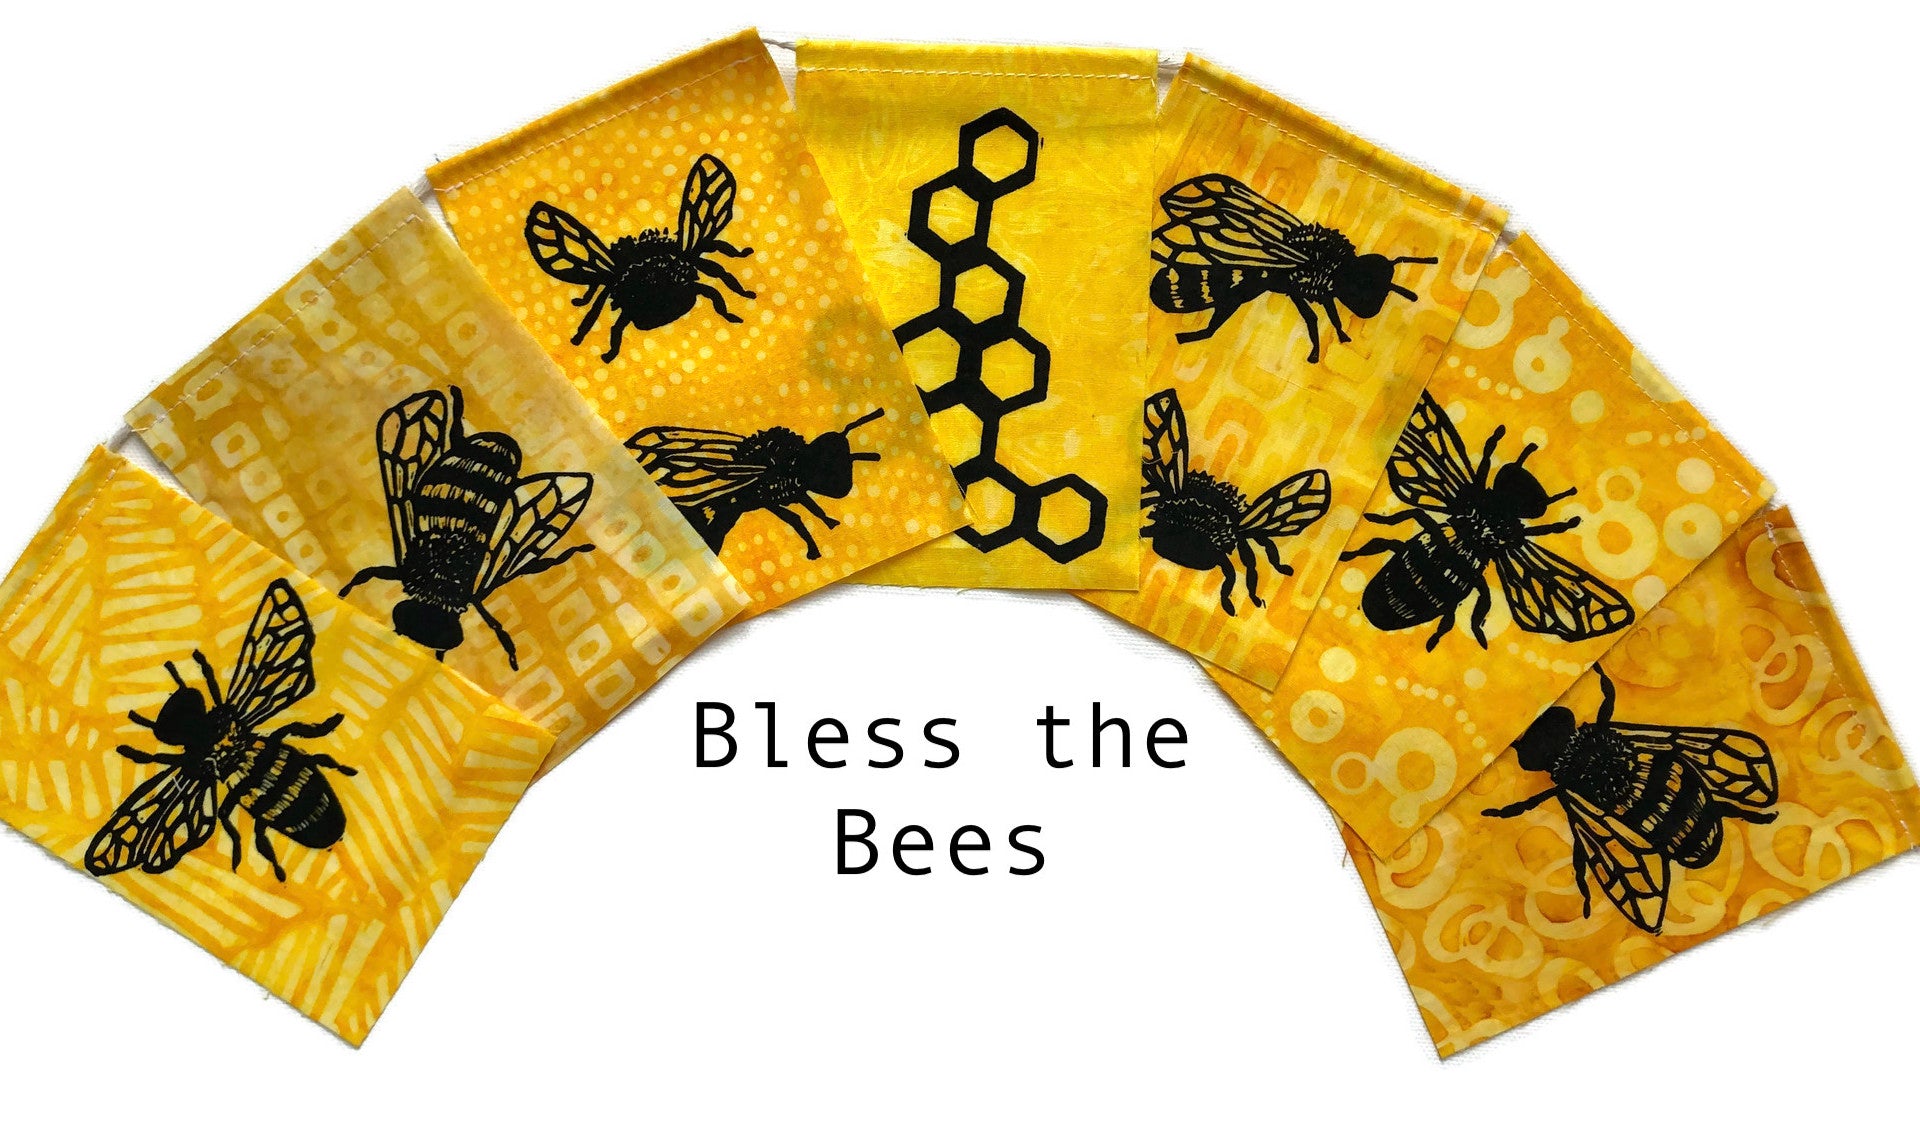 Small Flag Set with images and words to celebrate Bees